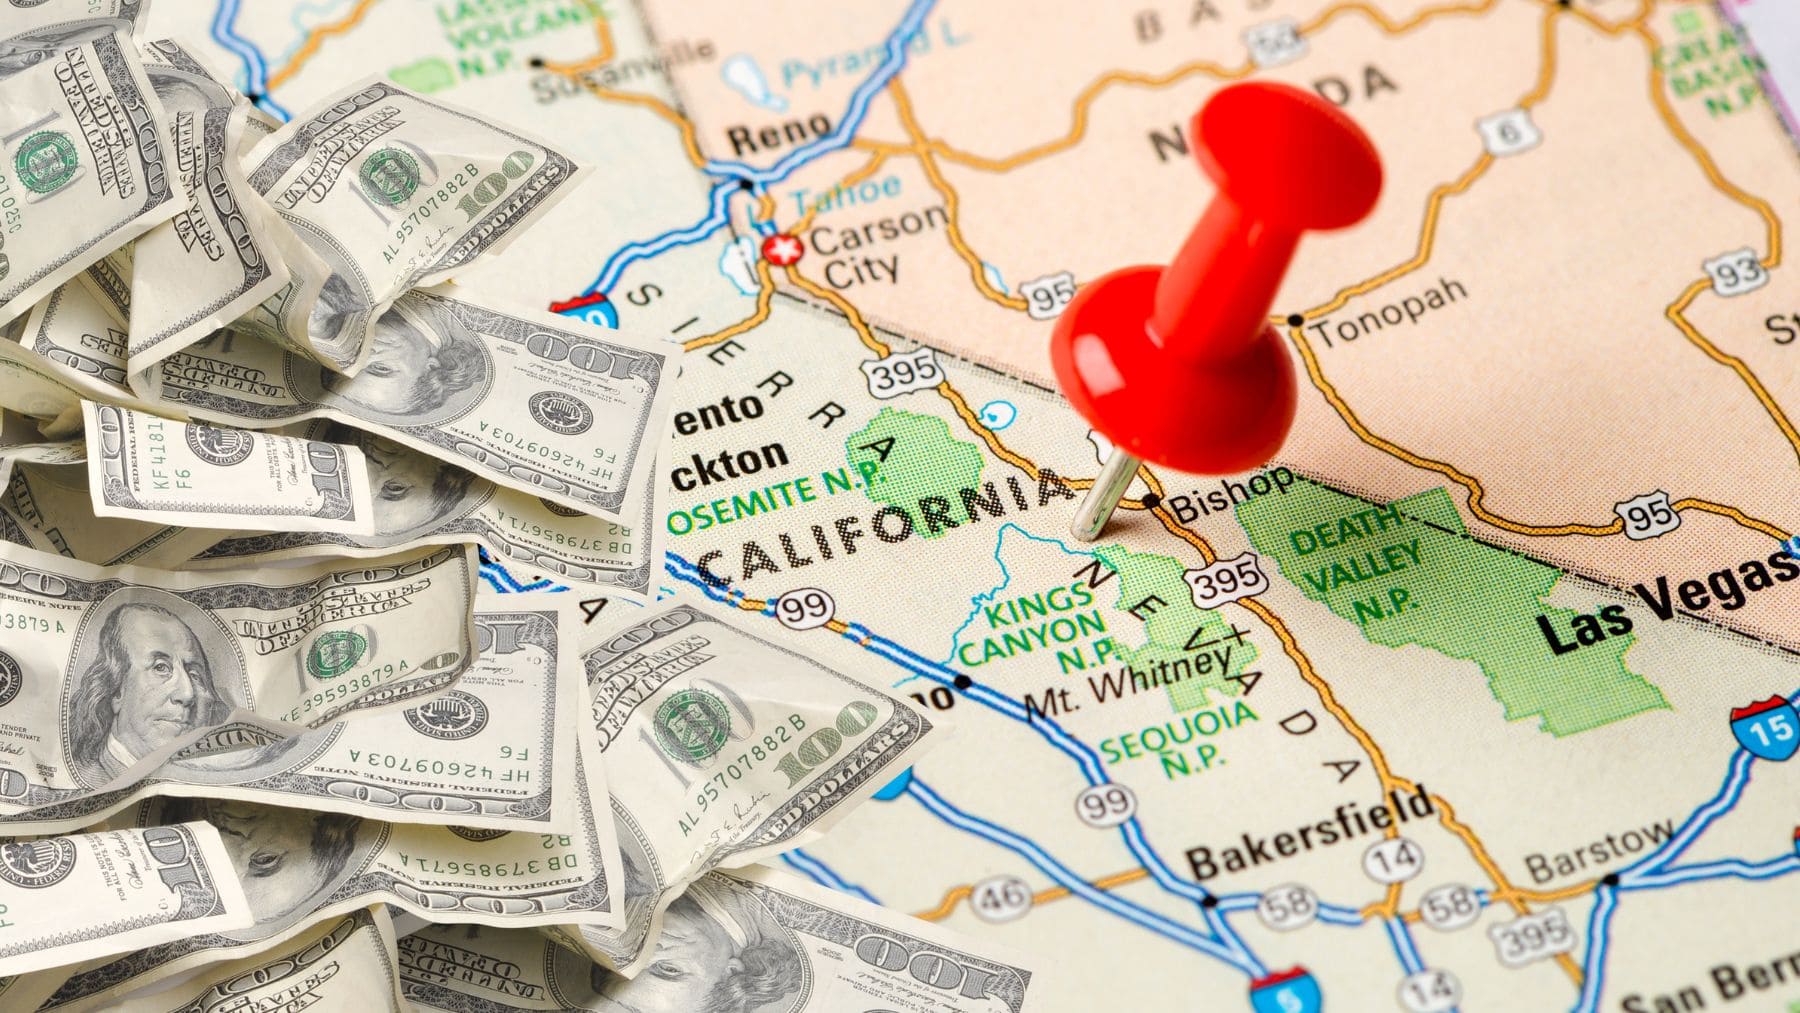 A Caliofrnia map with the money from the Stimulus check